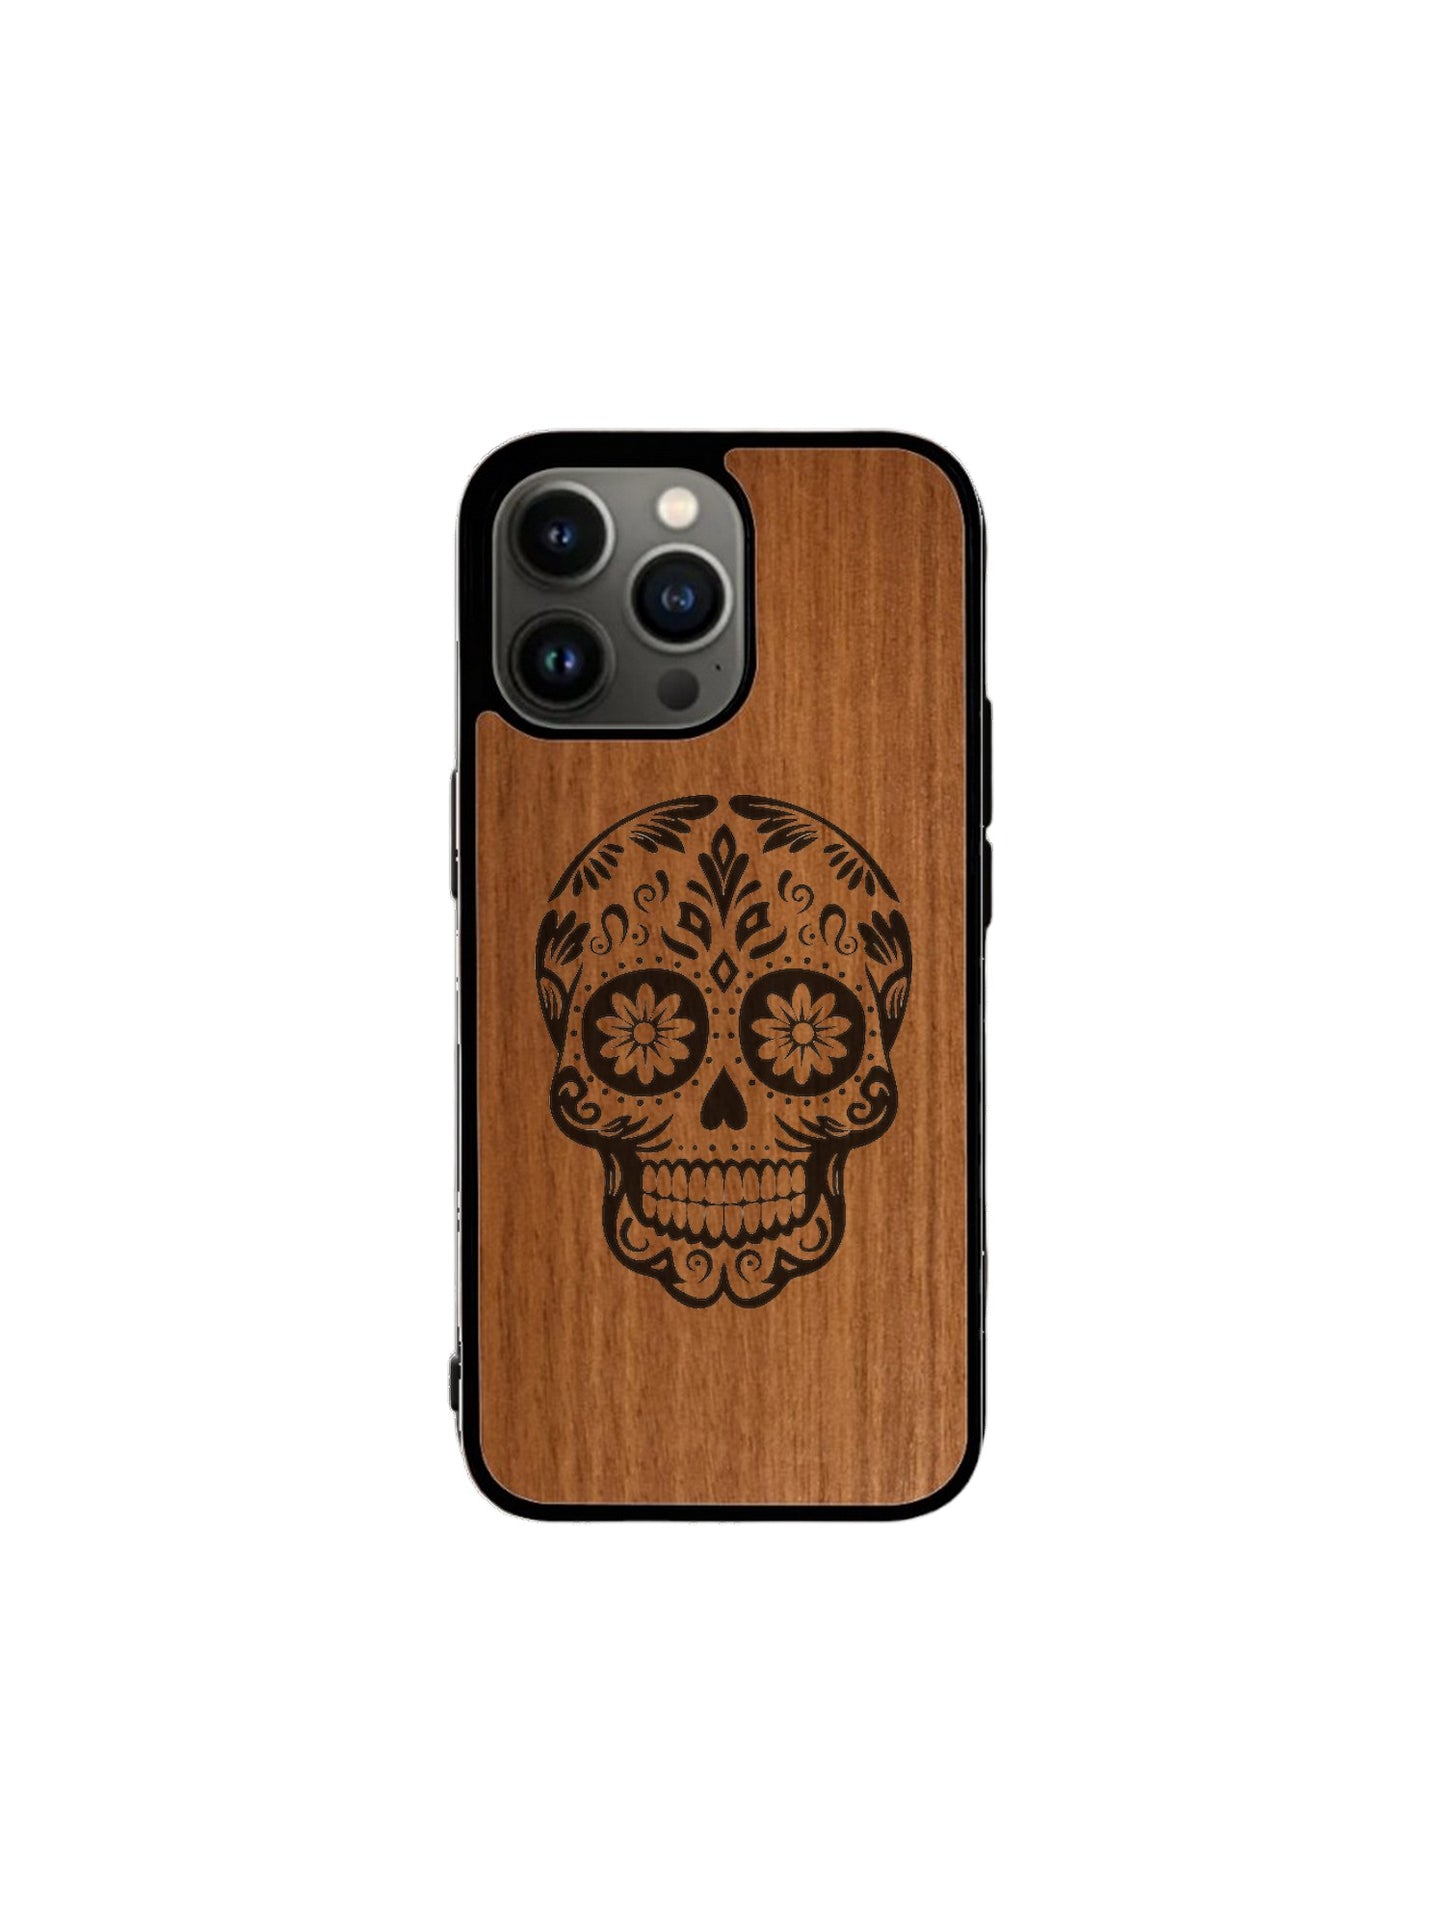 Iphone case - Mexican skull